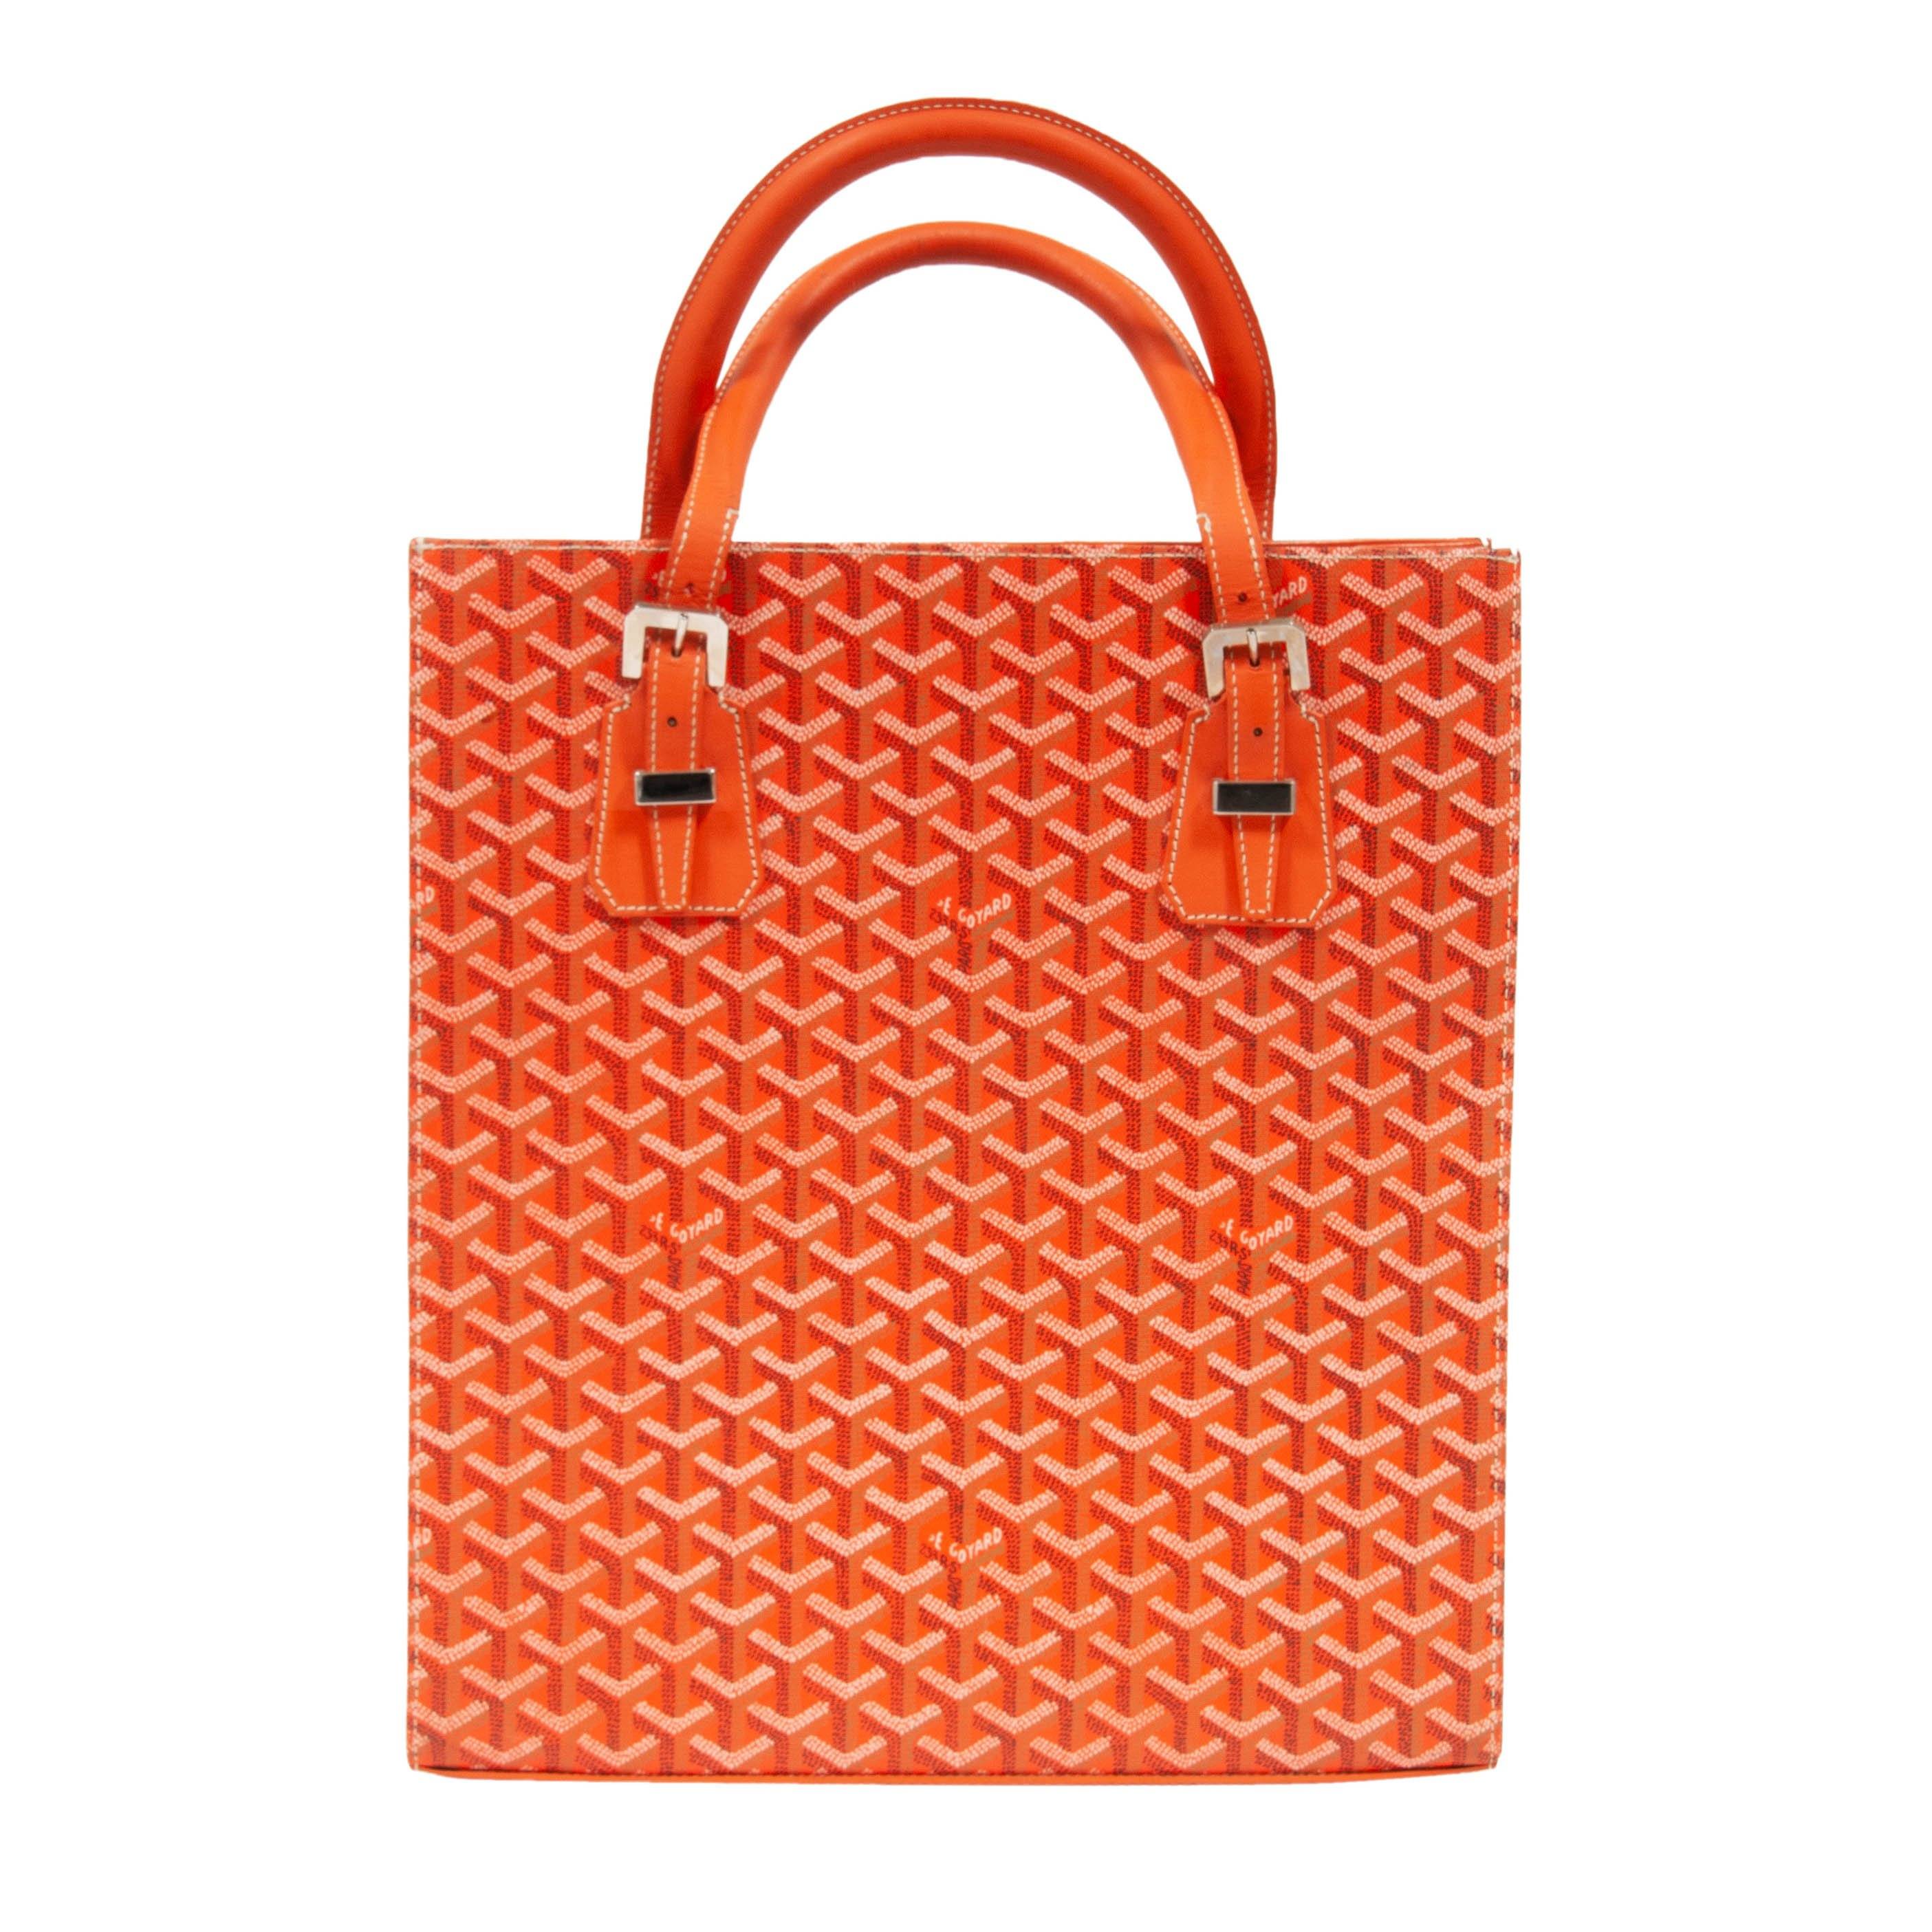 Tote Bag Organizer For Goyard St Louis GM Bag with Double Bottle Holde